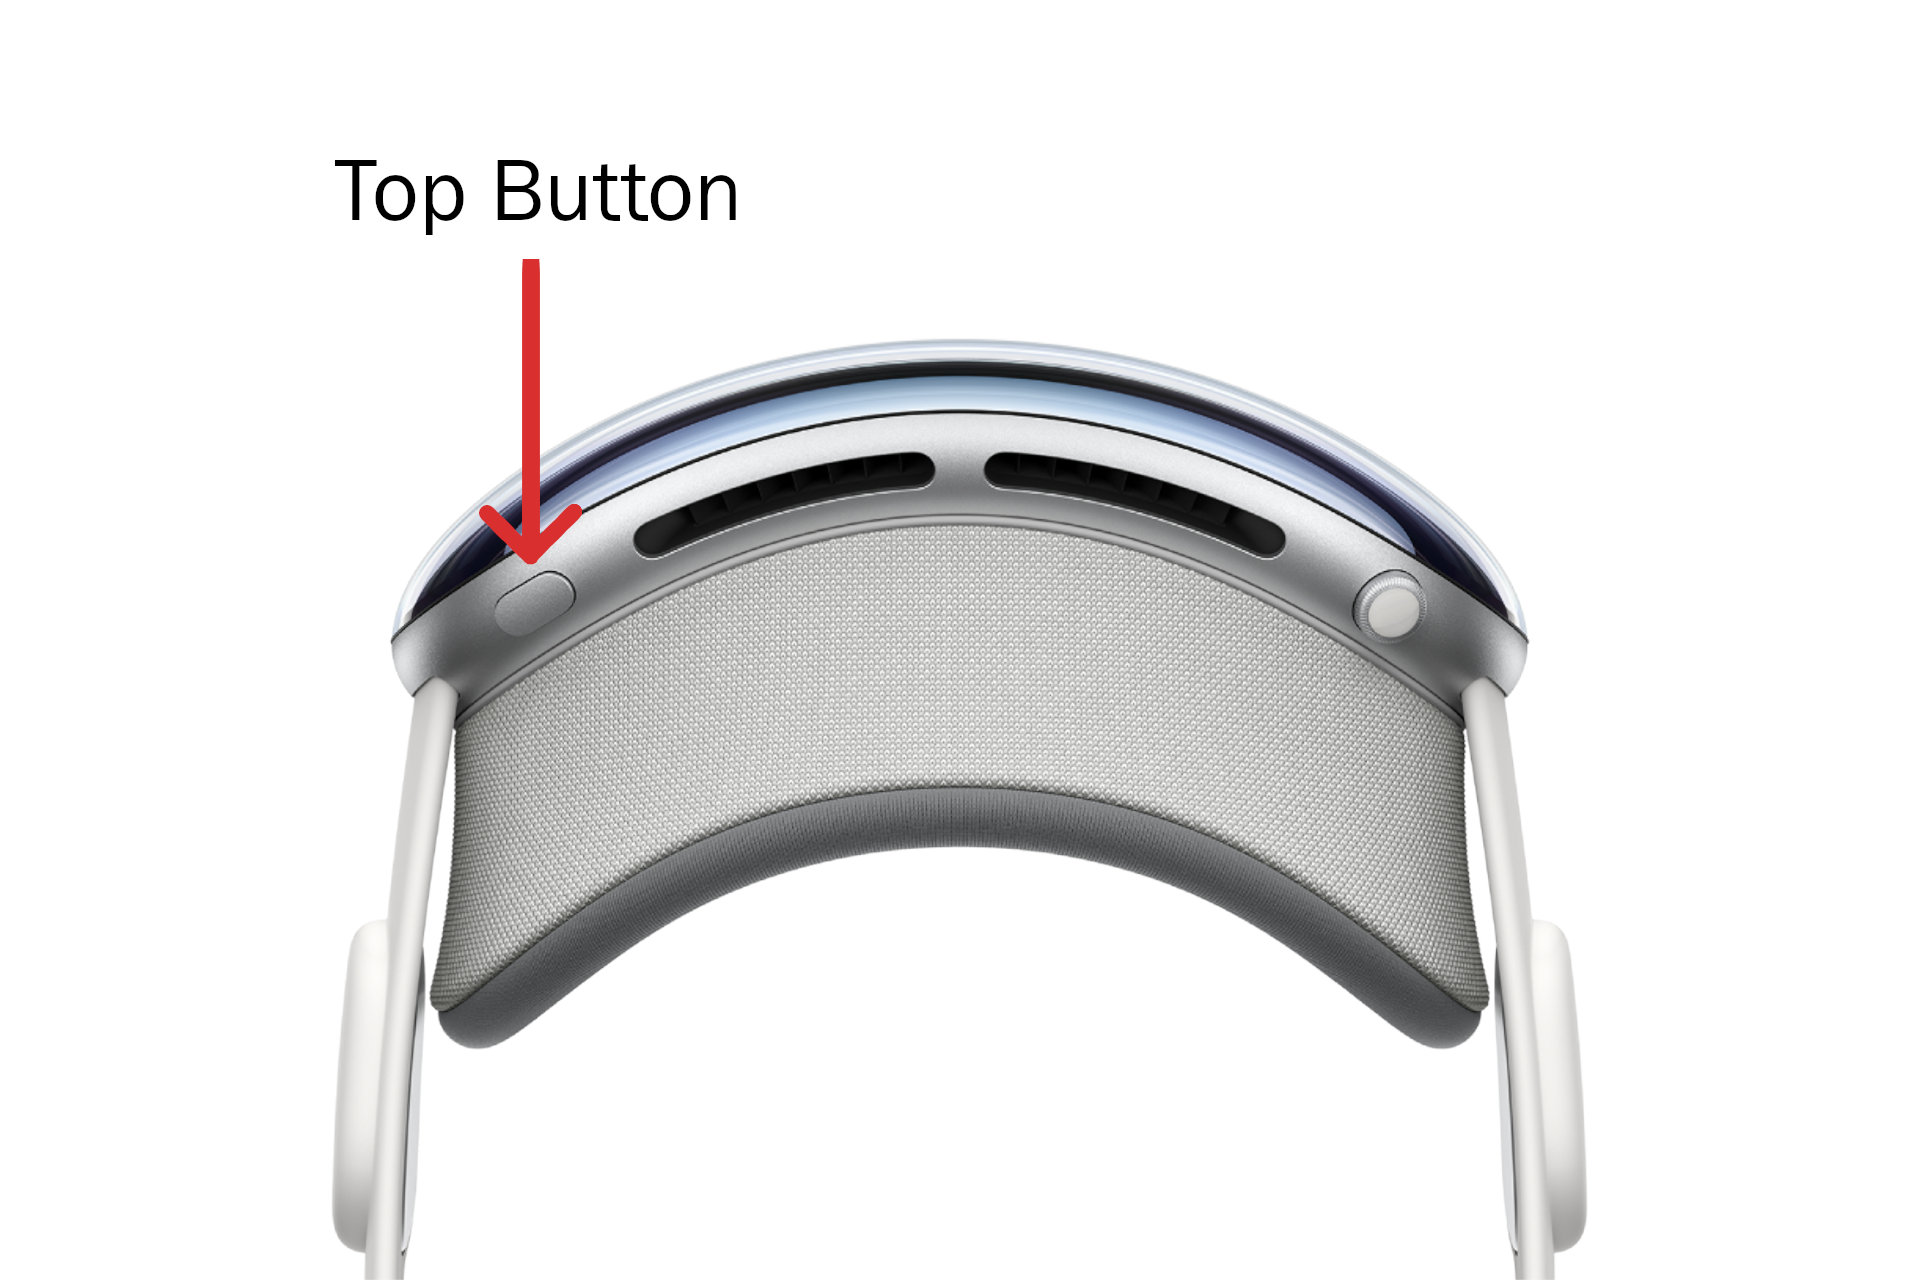 You can turn on the Apple Vision Pro with the top button.